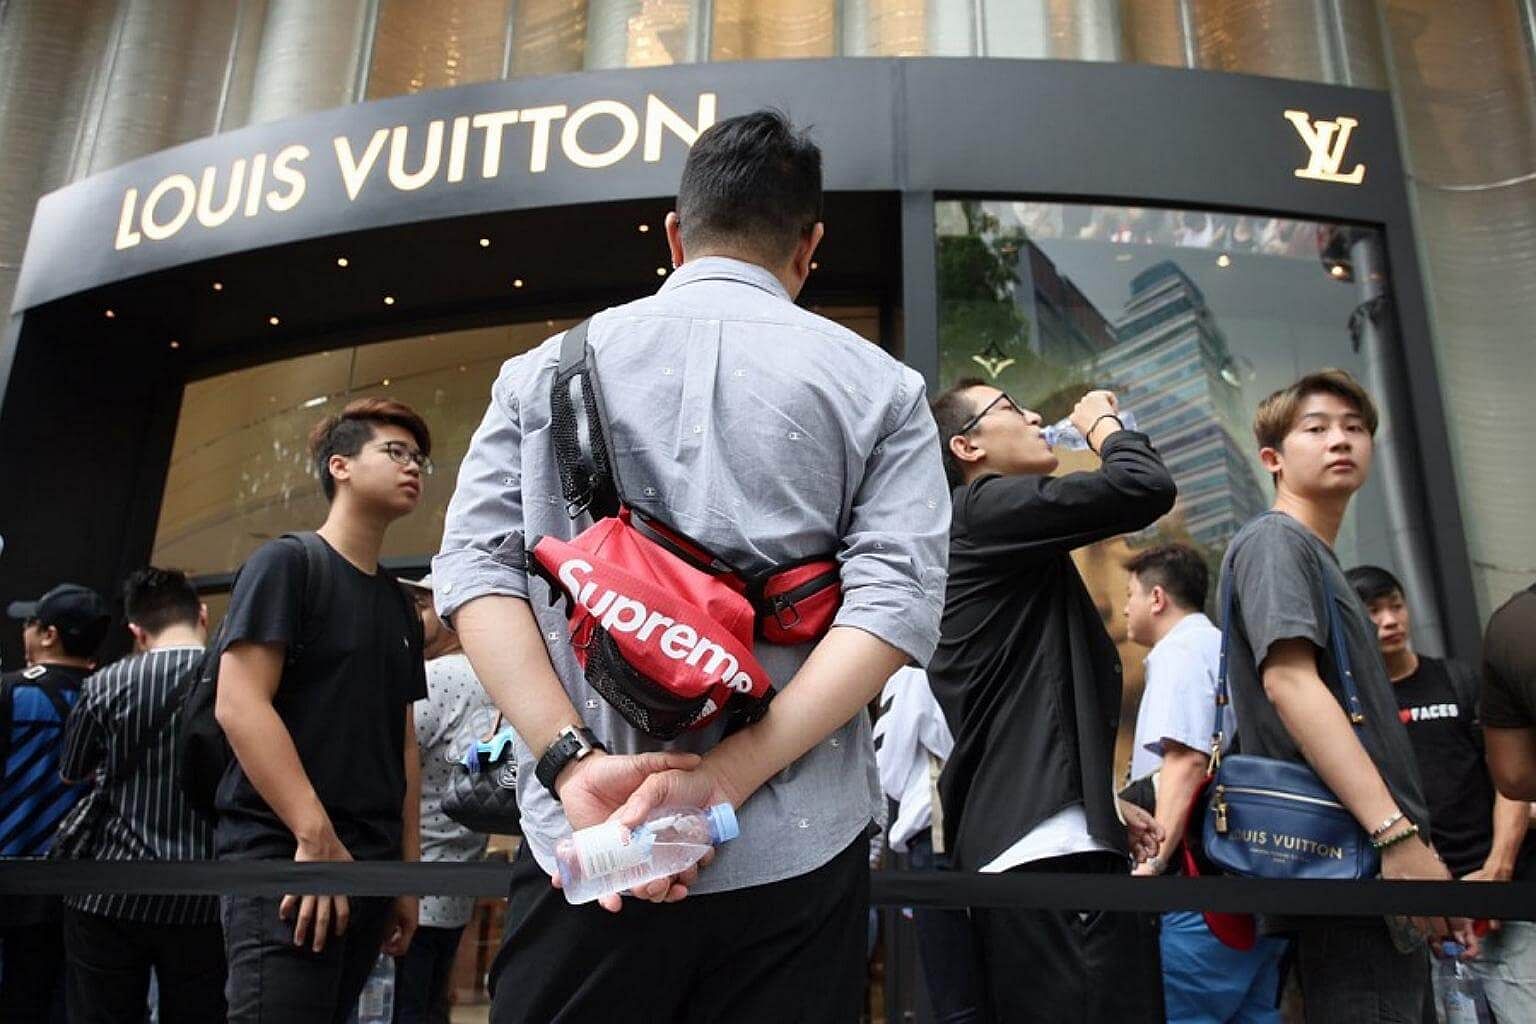 Get ready to wait in line: the Supreme x Louis Vuitton